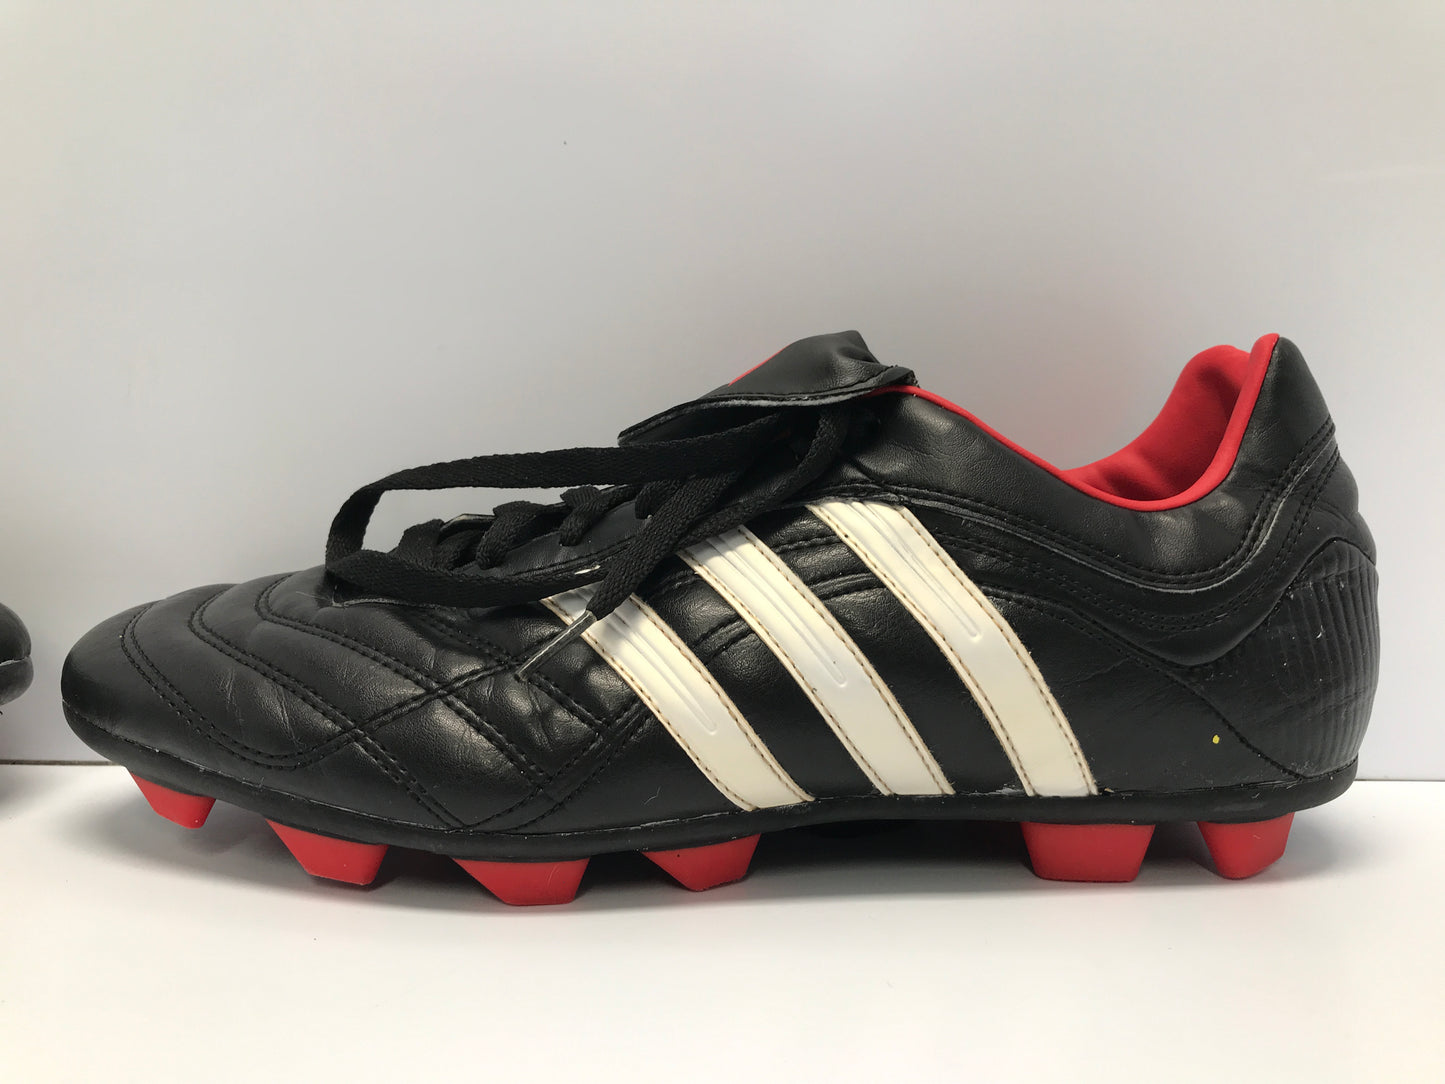 Soccer Shoes Cleats Men's Size 11 Adidas Black White Red Excellent